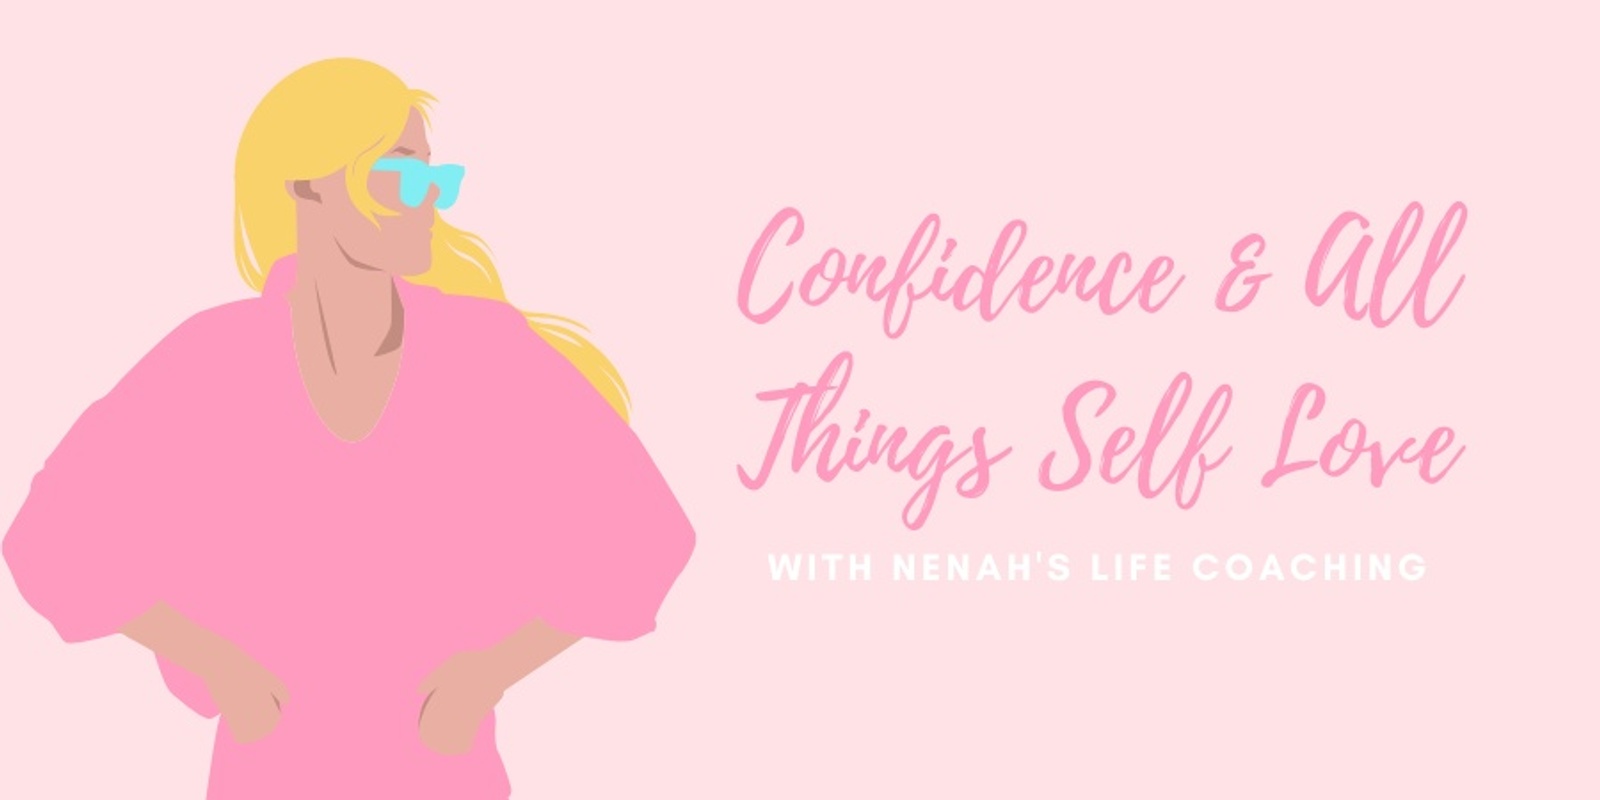 Banner image for Confidence & All Things Self Love